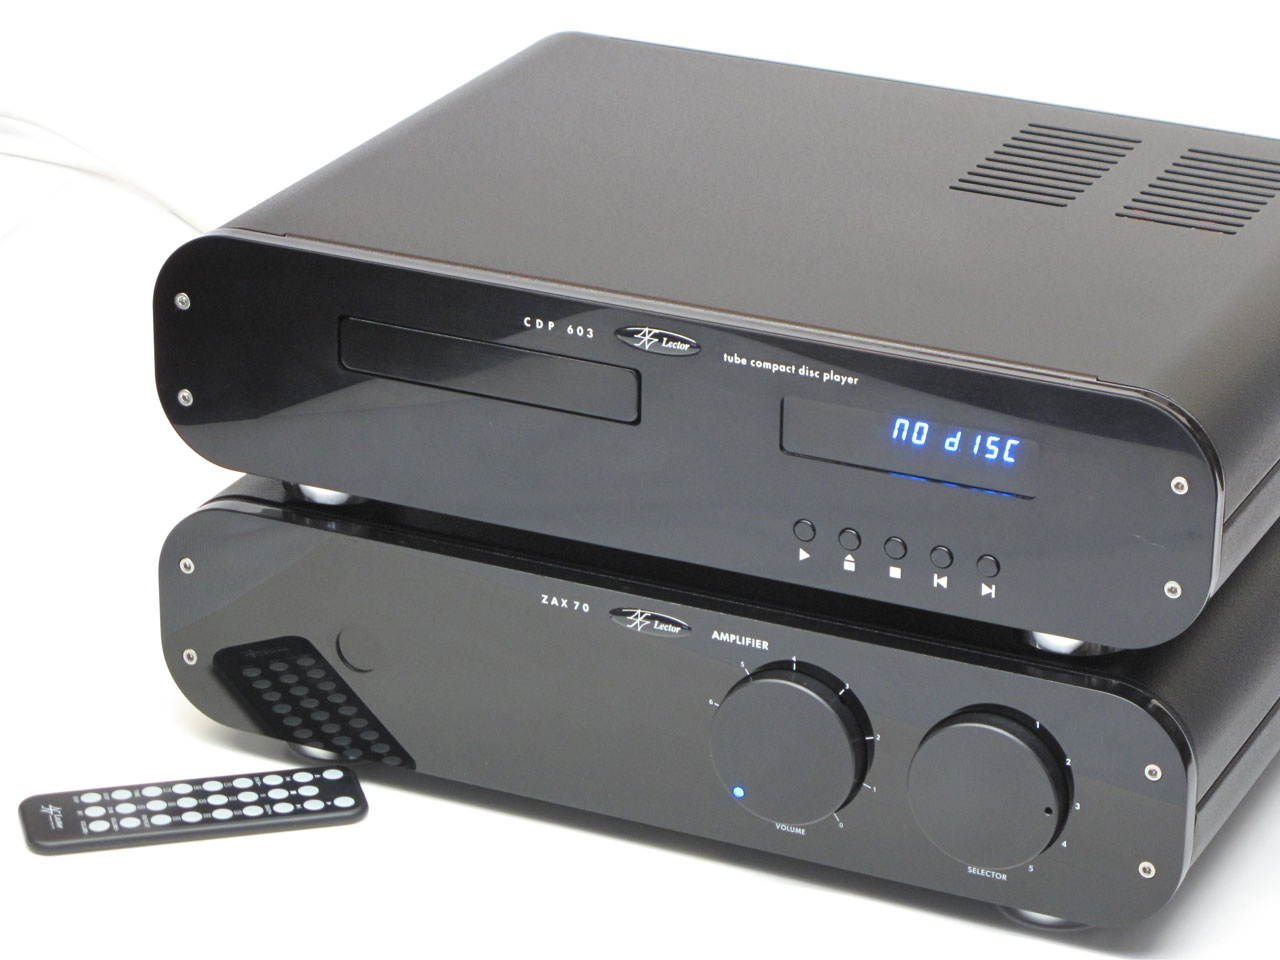 Lector Frontloader-CD-Player CDP-603 